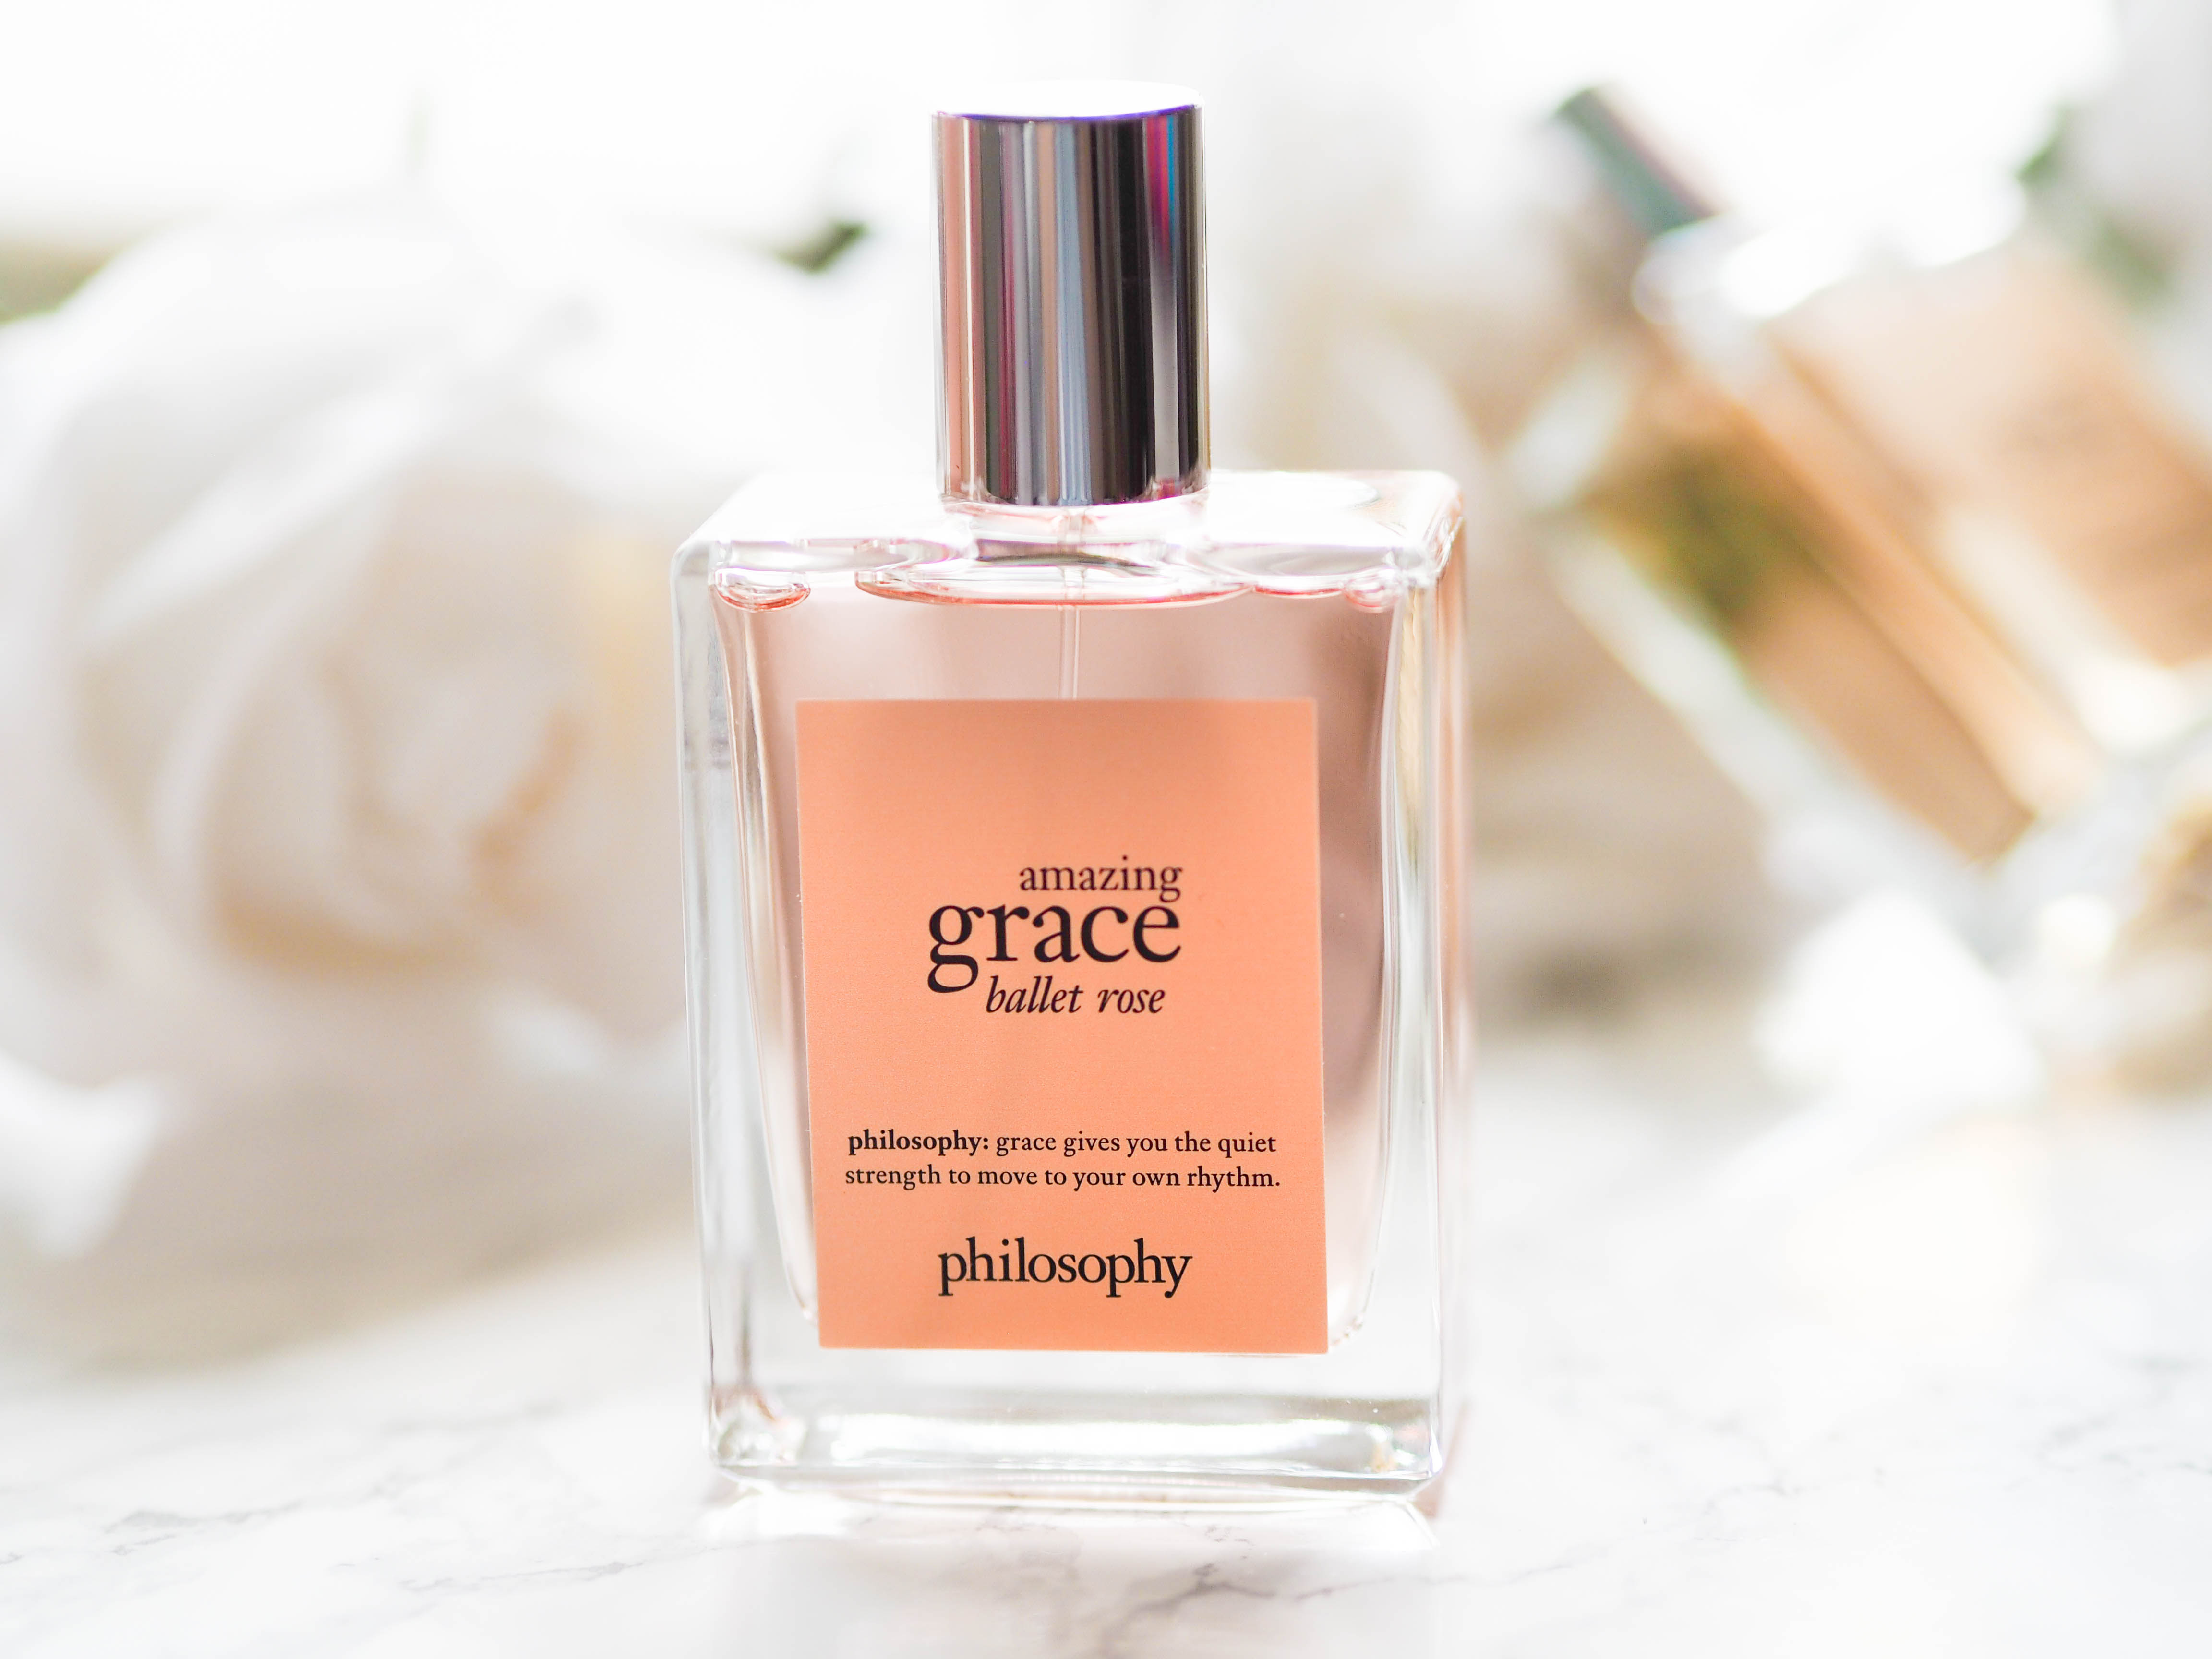 Philosophy Pure Grace Nude Rose and Amazing Grace Ballet Rose